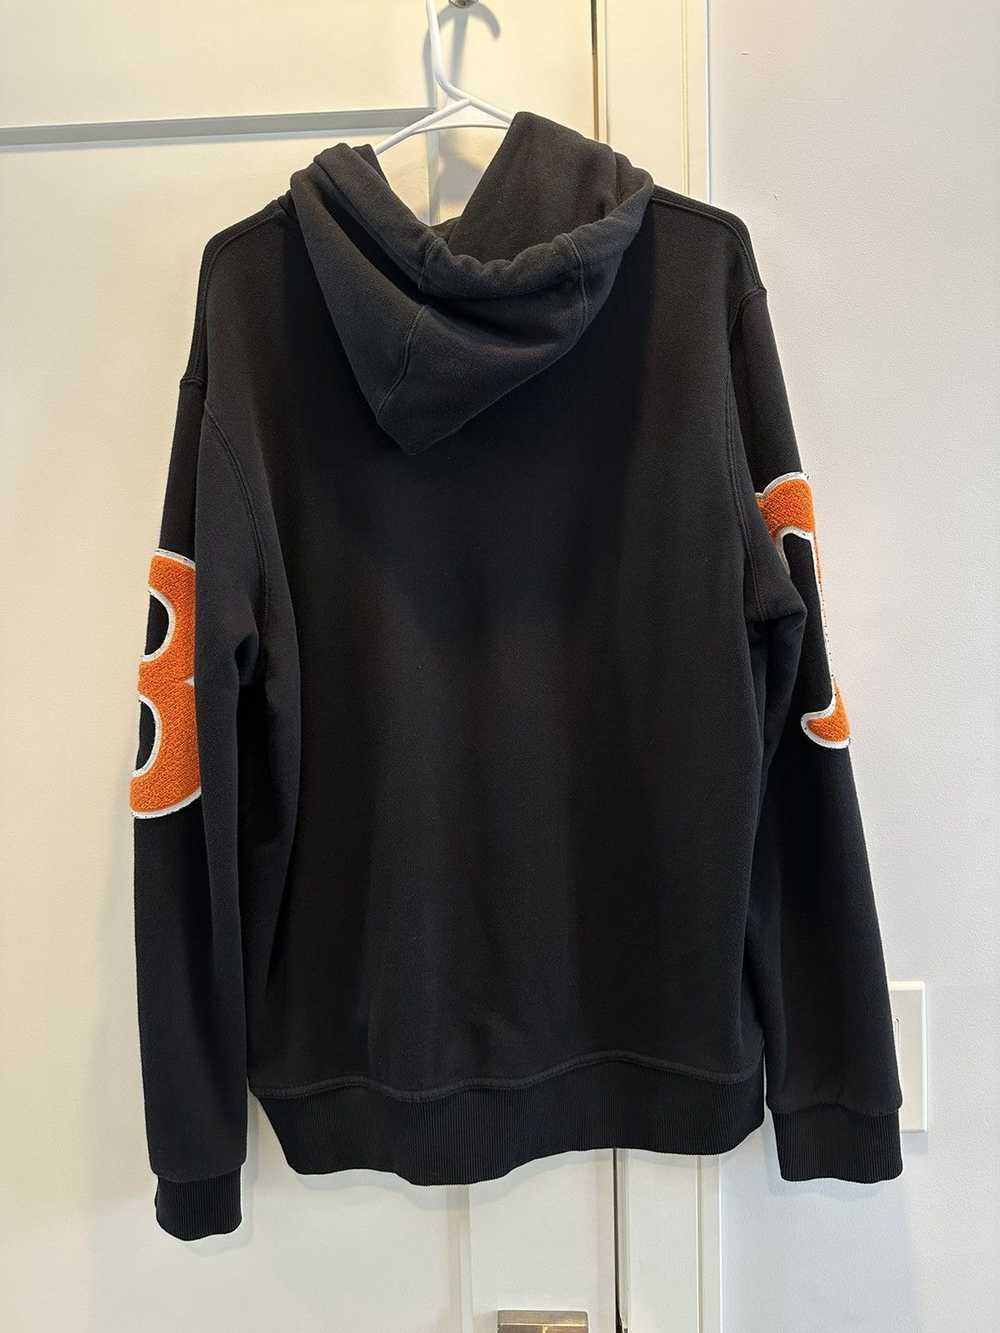 Burberry Burberry Letter Graphic Hoodie - image 2